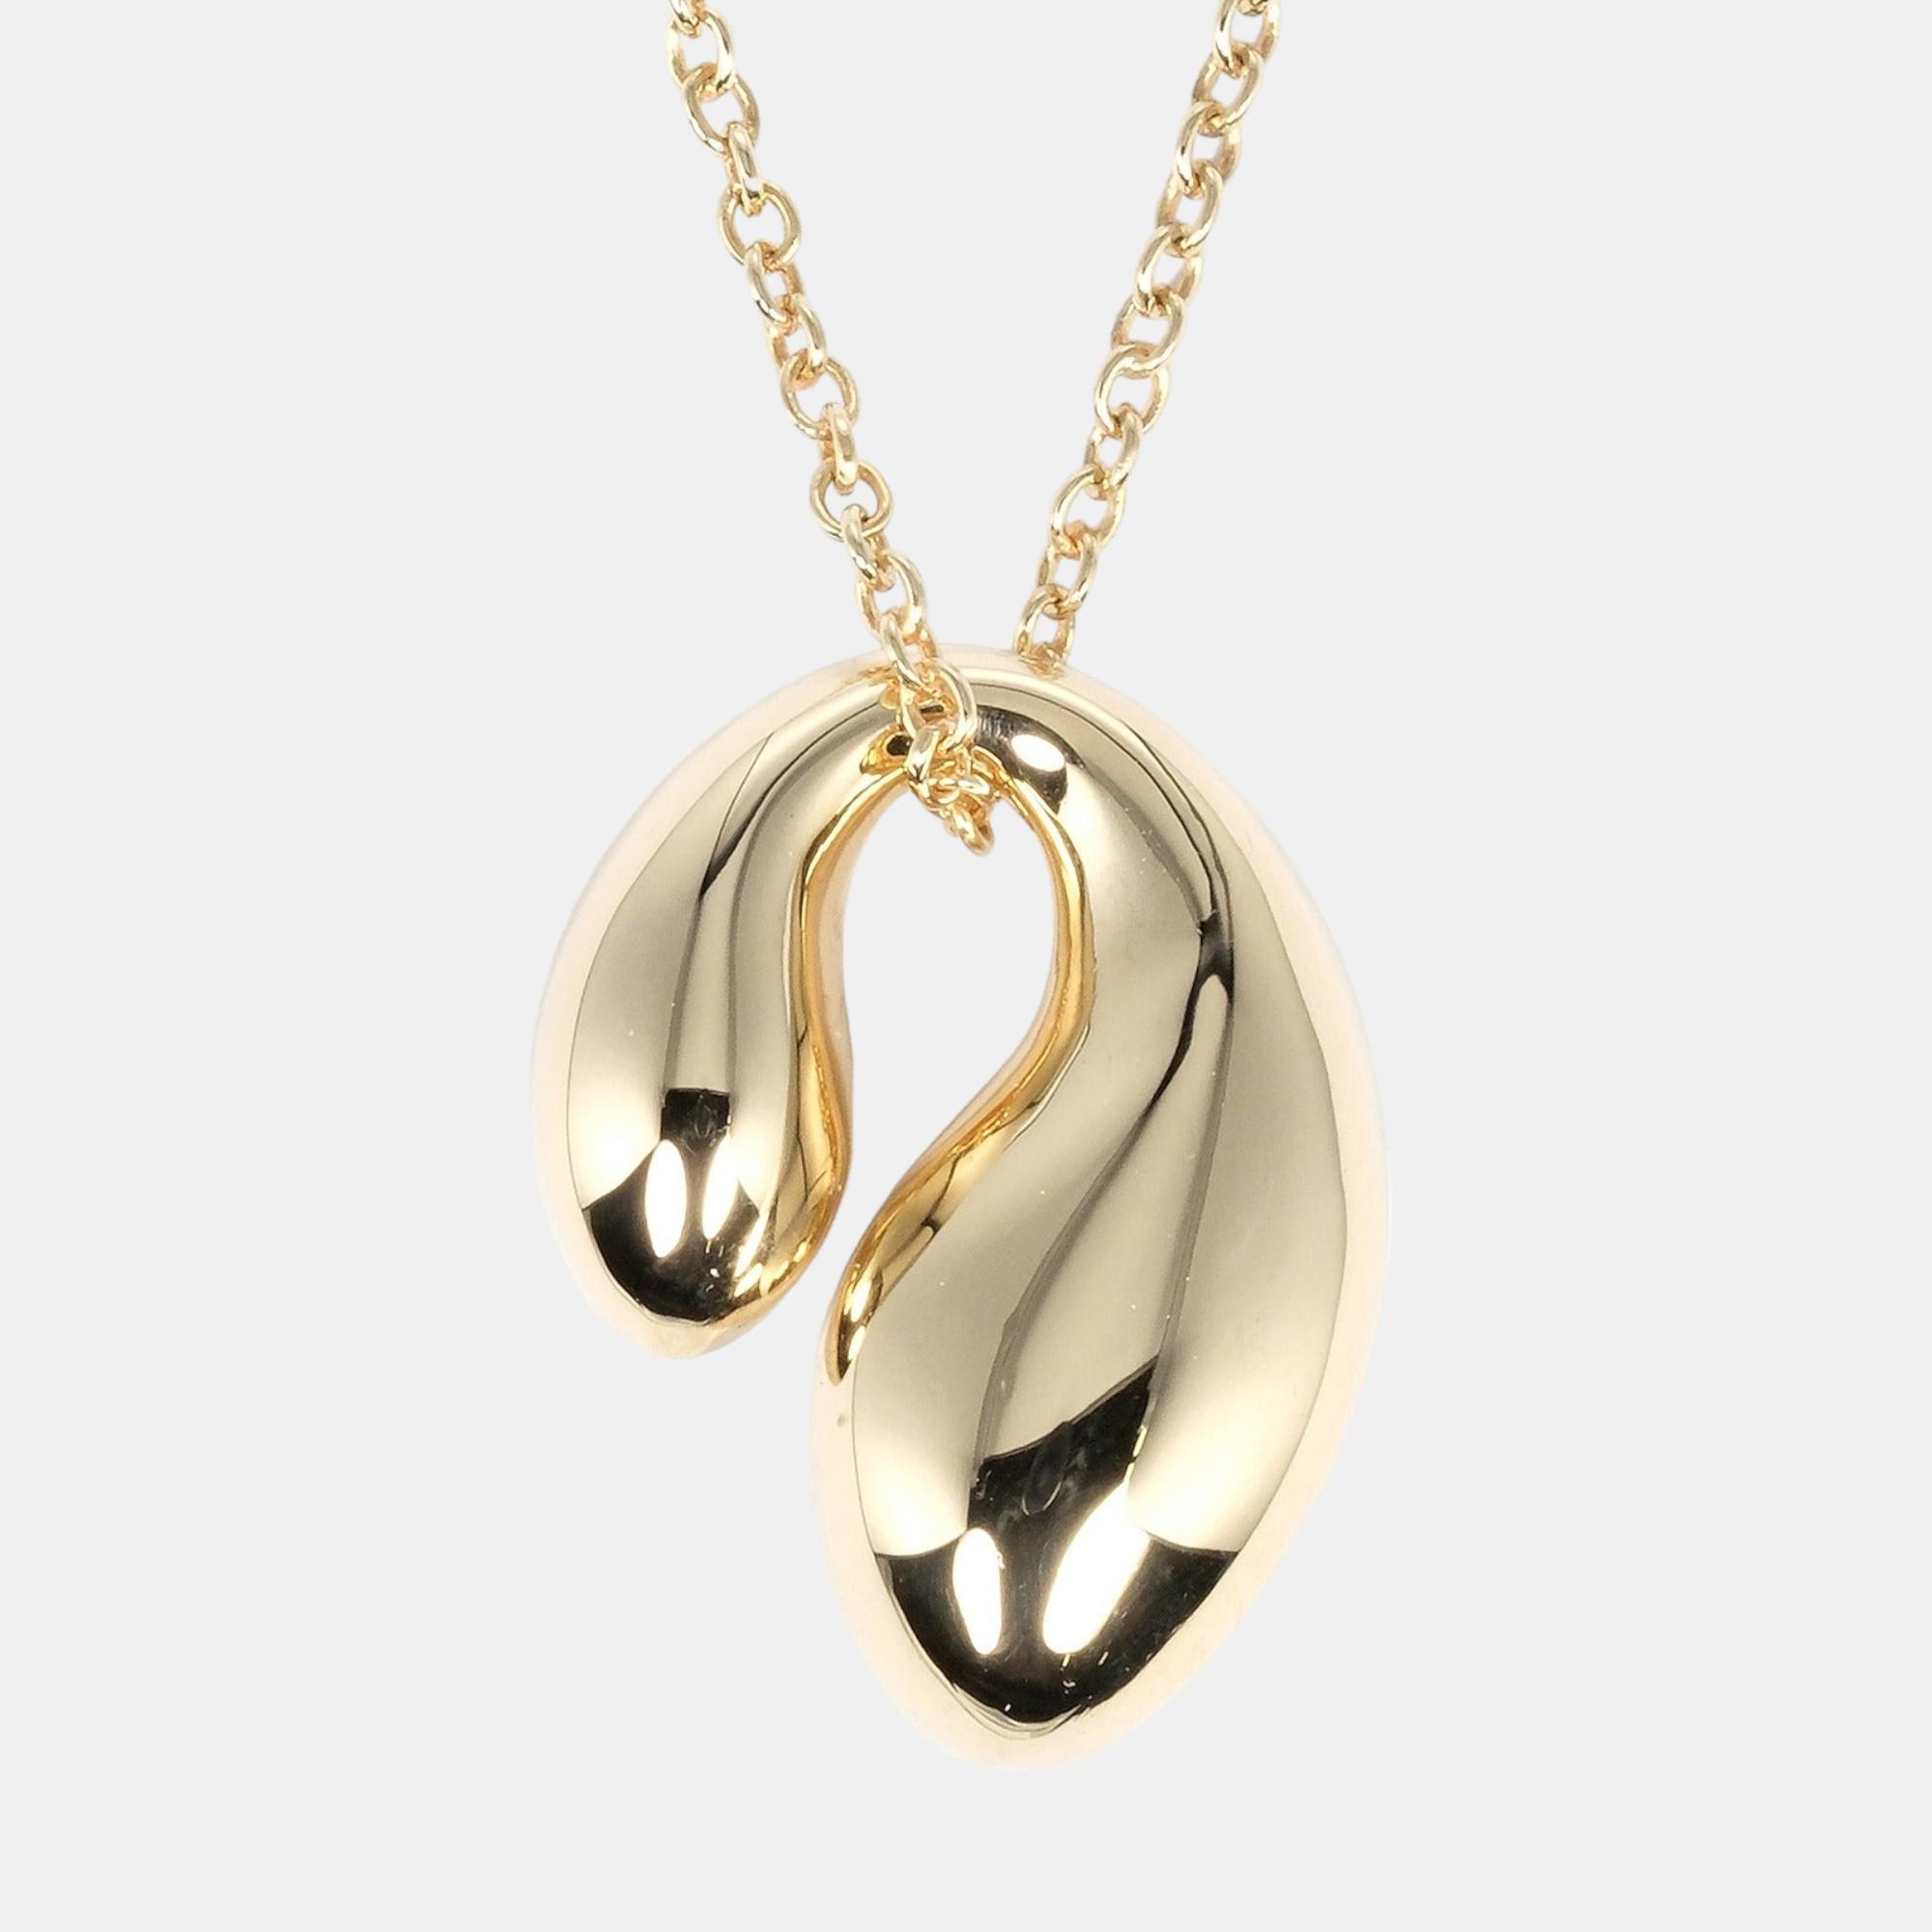 Pre-owned Tiffany & Co Elsa Peretti Teardrop 18k Yellow Gold Necklace